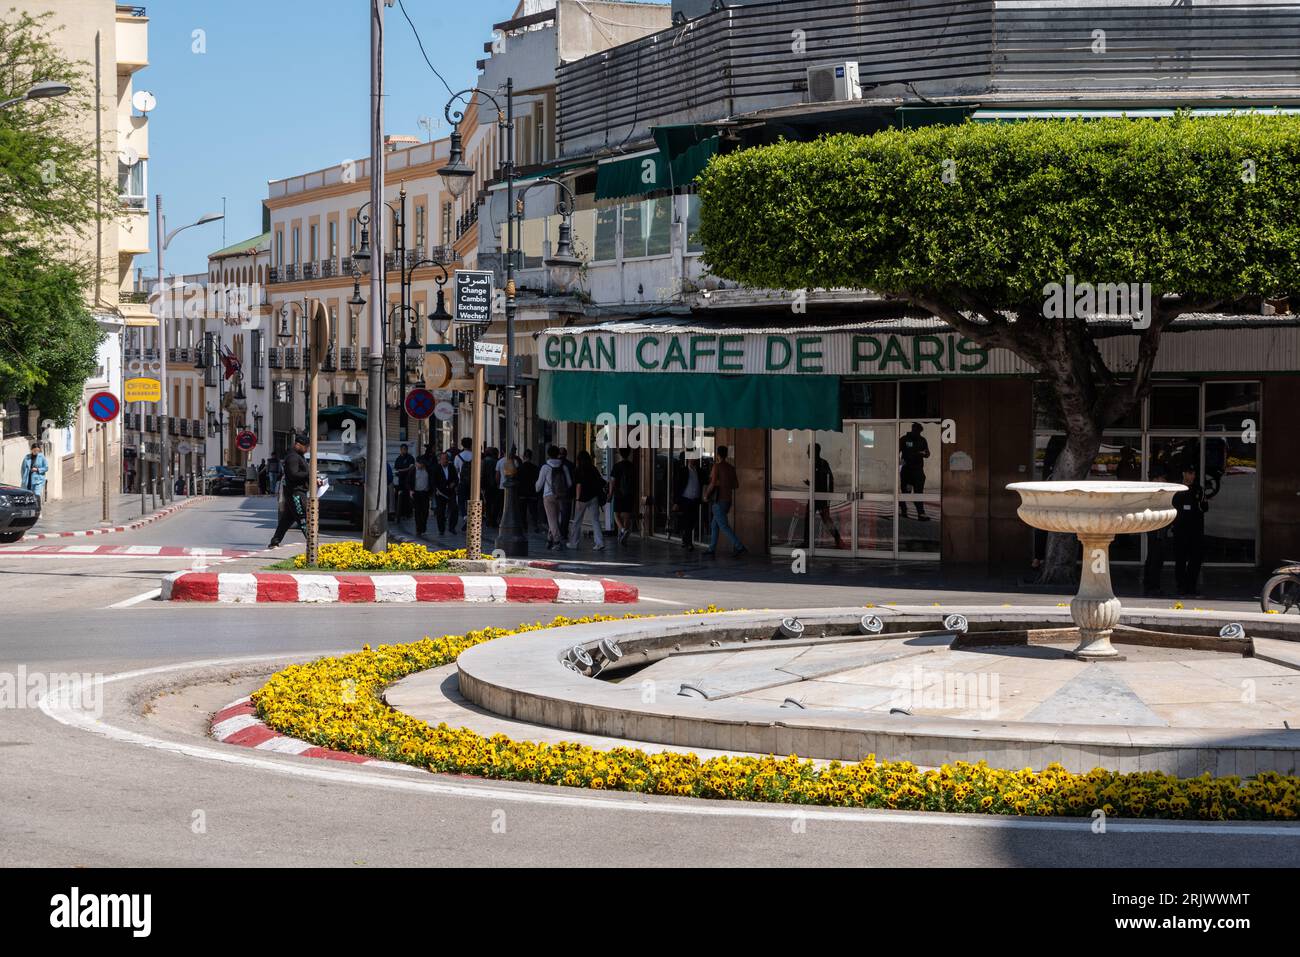 TANGIER, MOROCCO - March 30, 2023 - Famous Gran Cafe de Paris in the city center of Tangier, Morocco Stock Photo